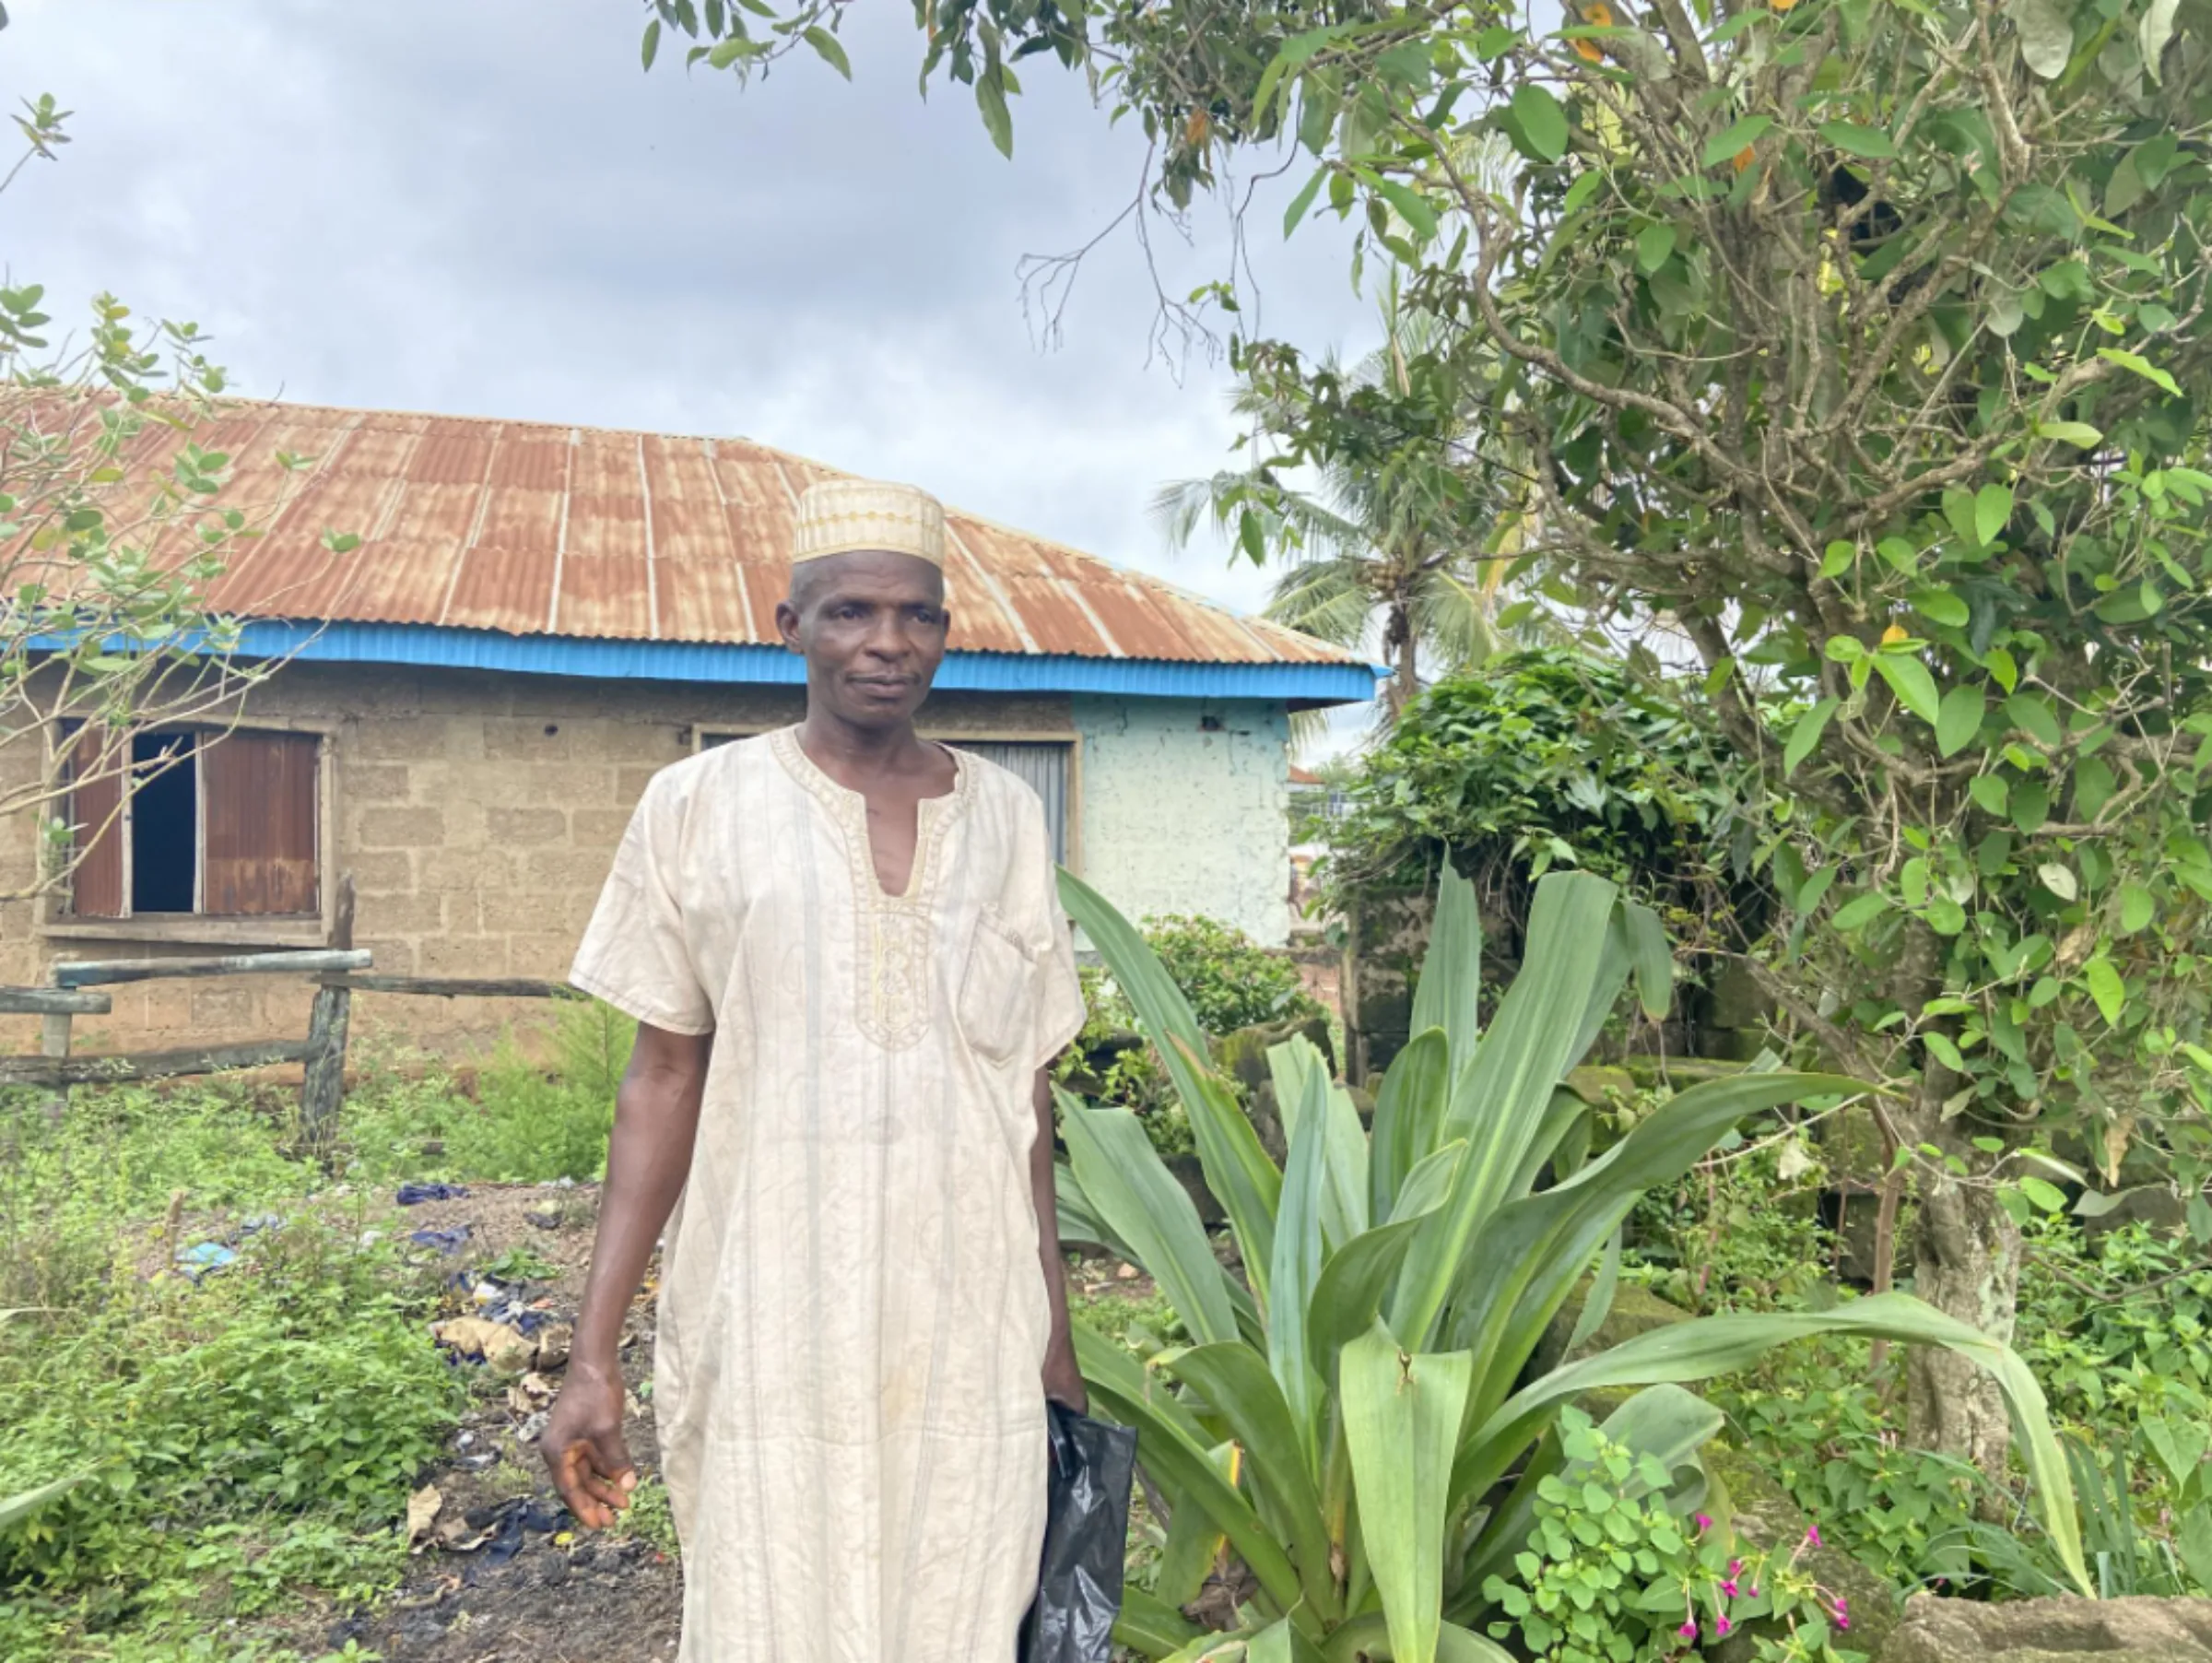 Egunbiyi Yinusa, a traditional healer, stands in a garden at the backyard of his home in Oyo, Nigeria, September 27 2022